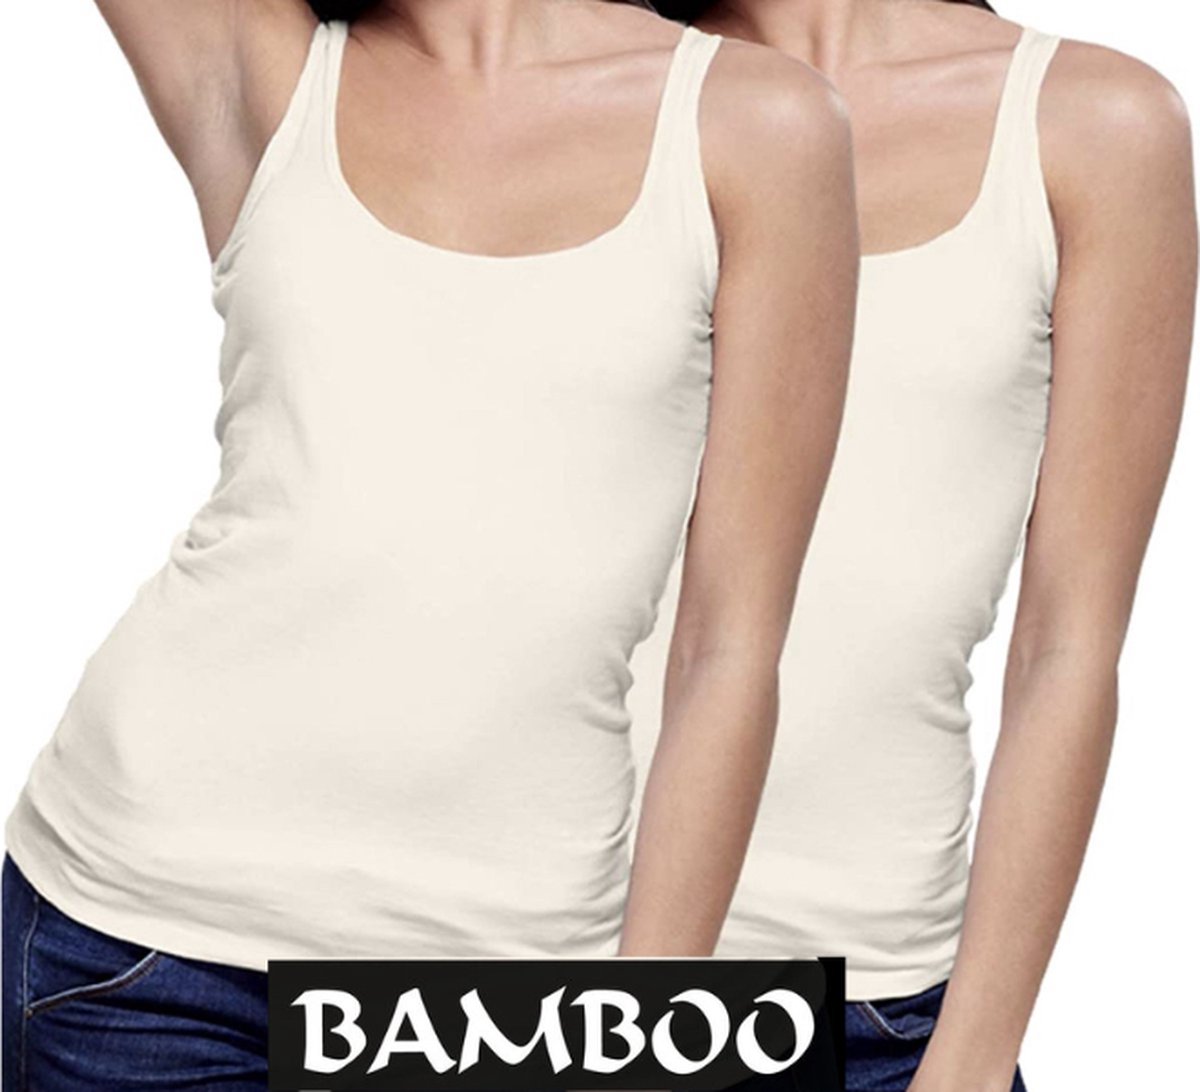 Bamboe dames top (tank top model) – 2 paar - dames – 95% bamboe – superzacht – champagne – maat XL